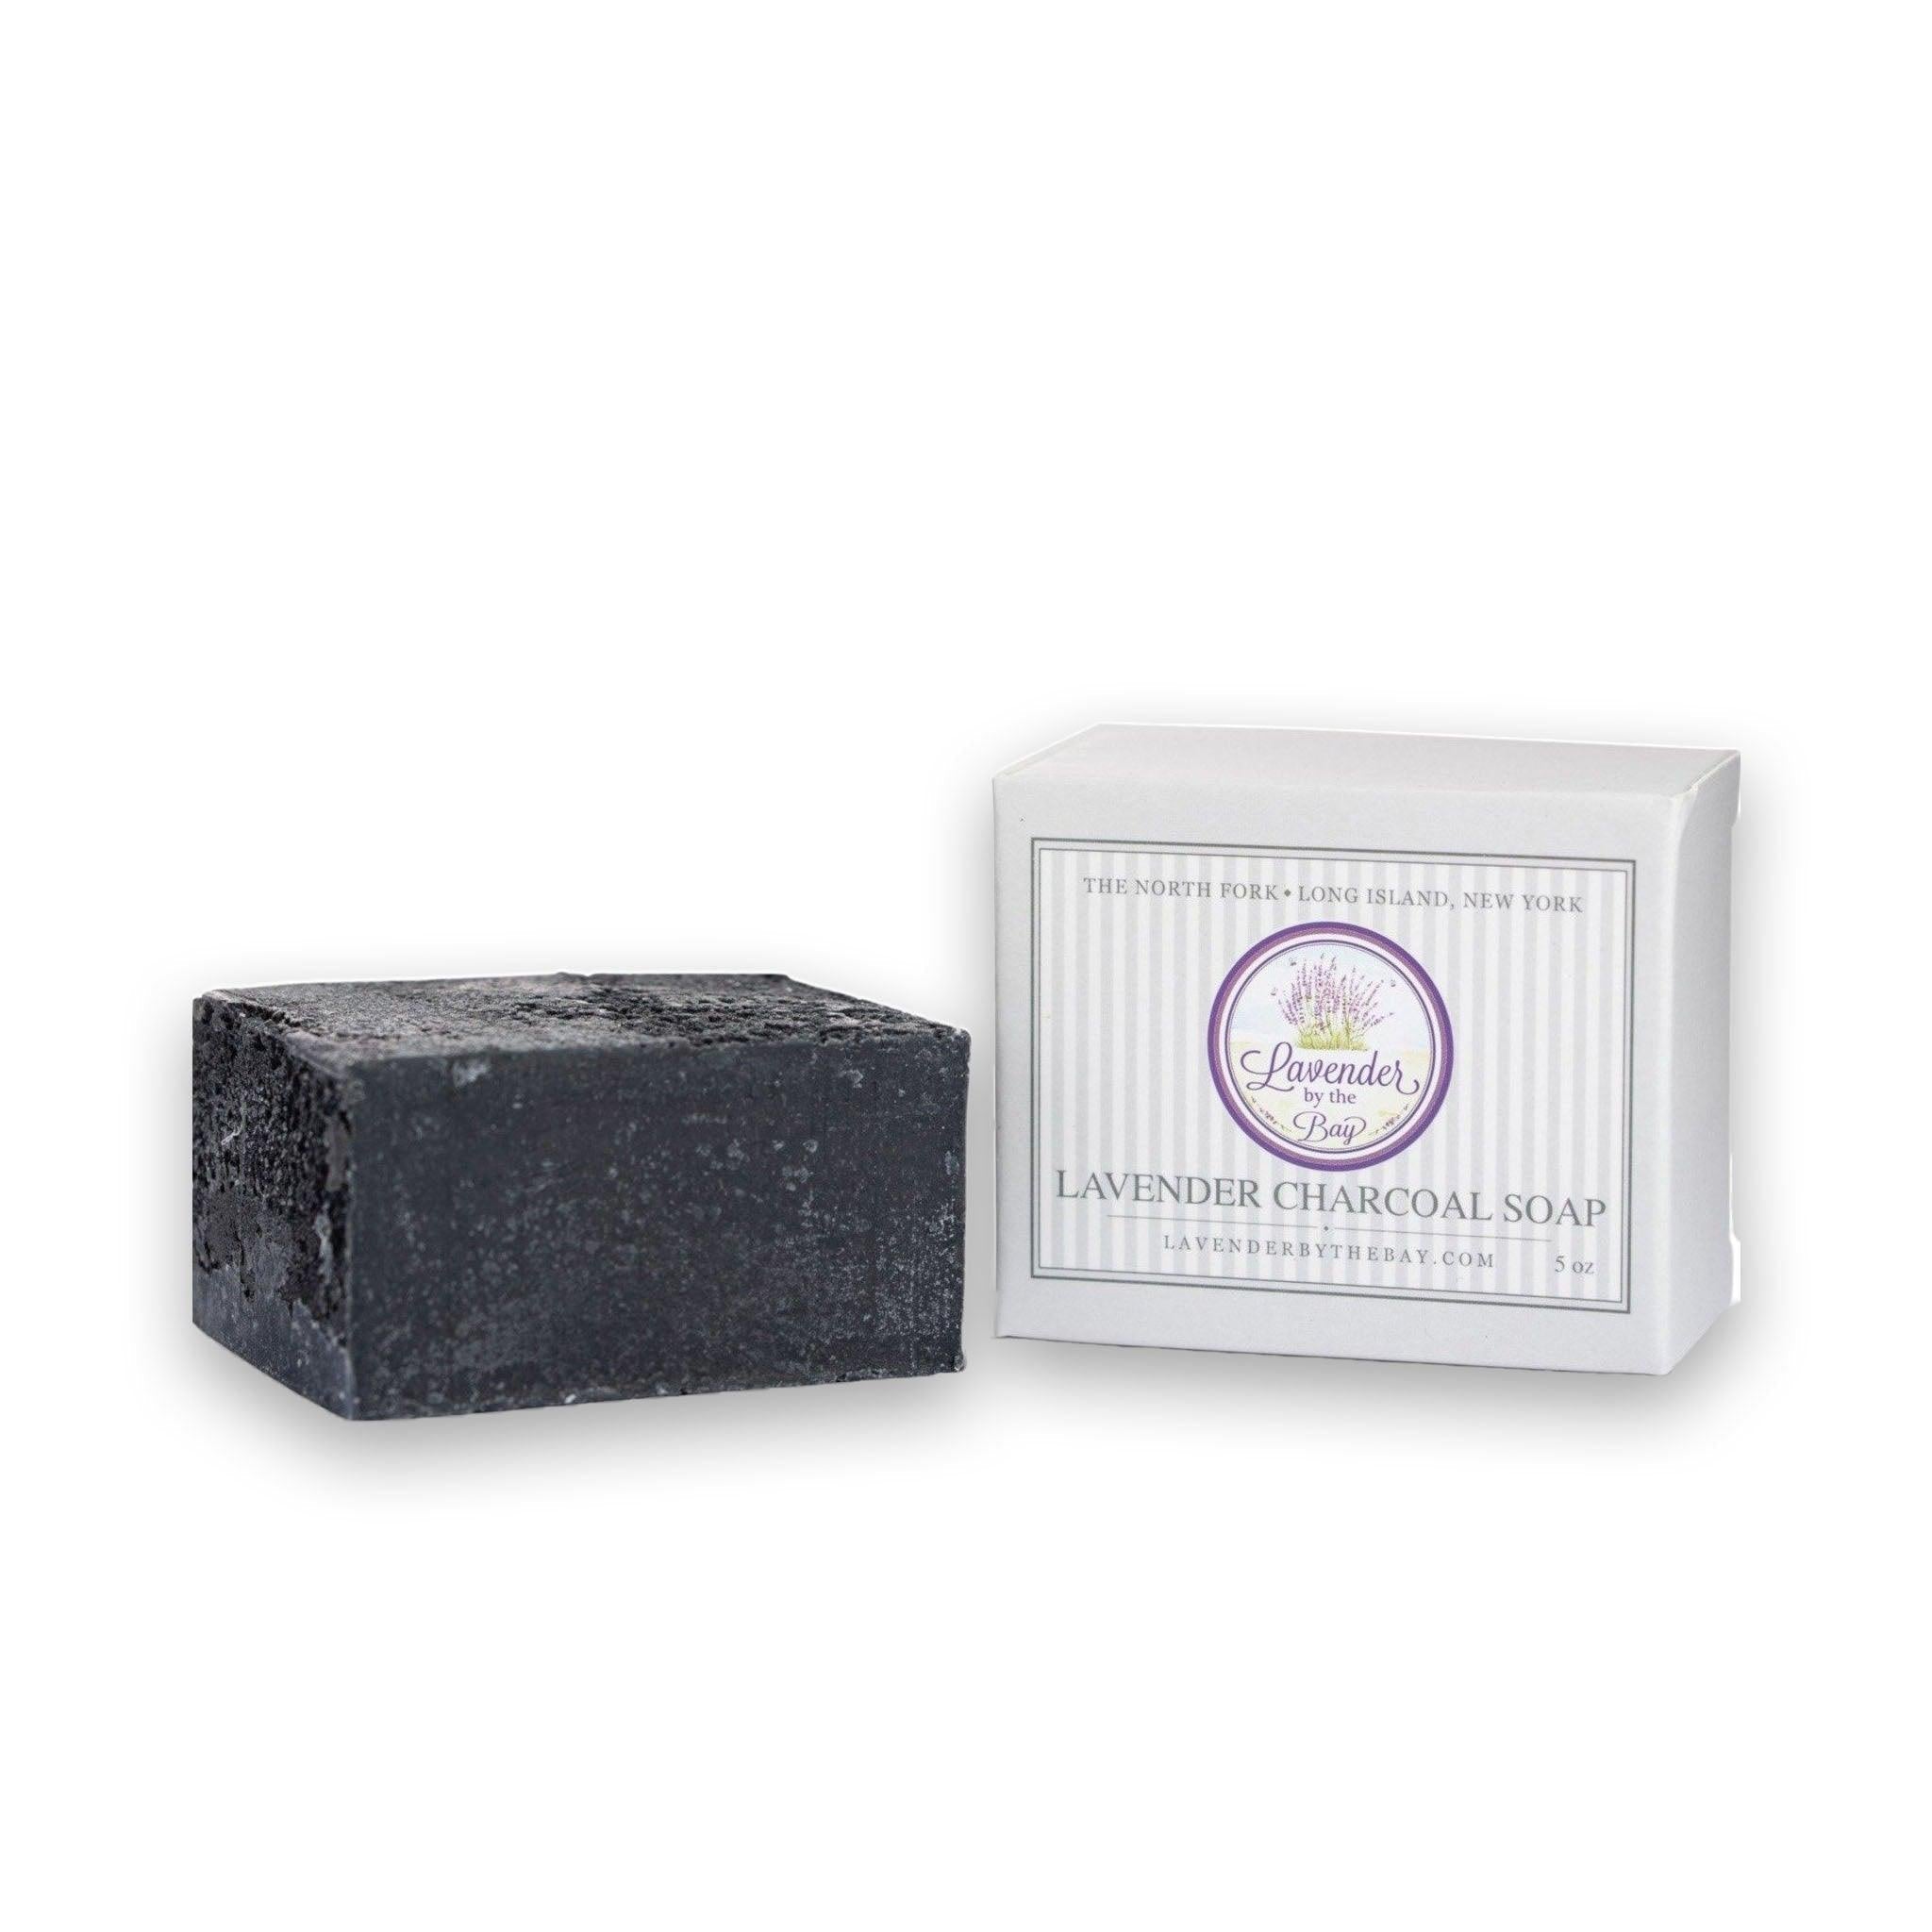 Lavender Charcoal Soap - Limited Edition - Lavender By The Bay